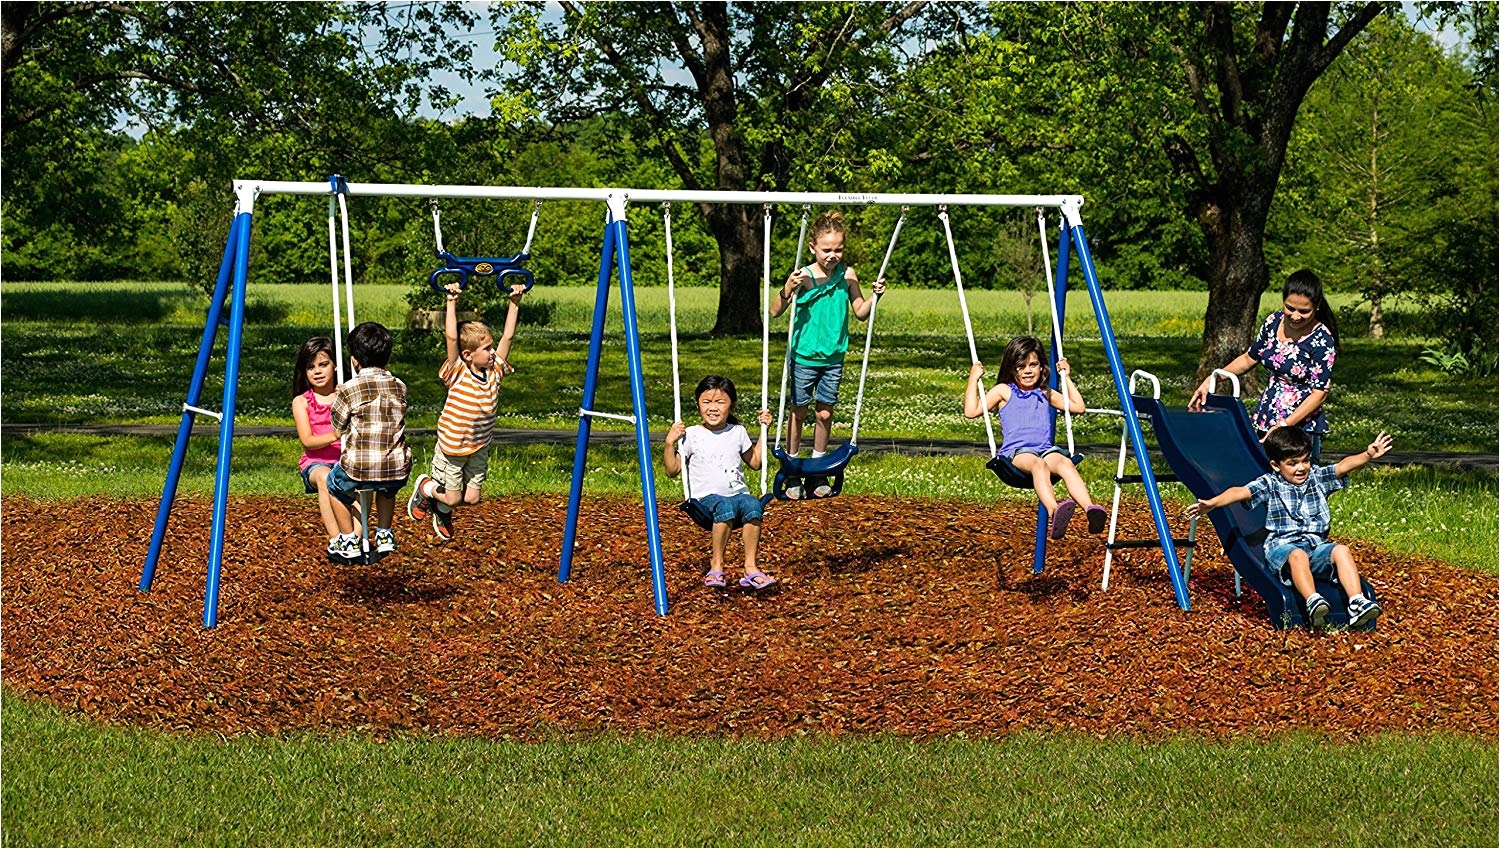 amazon com flexible flyer play around swing set trapeze slide swings air glider 42120t toys games